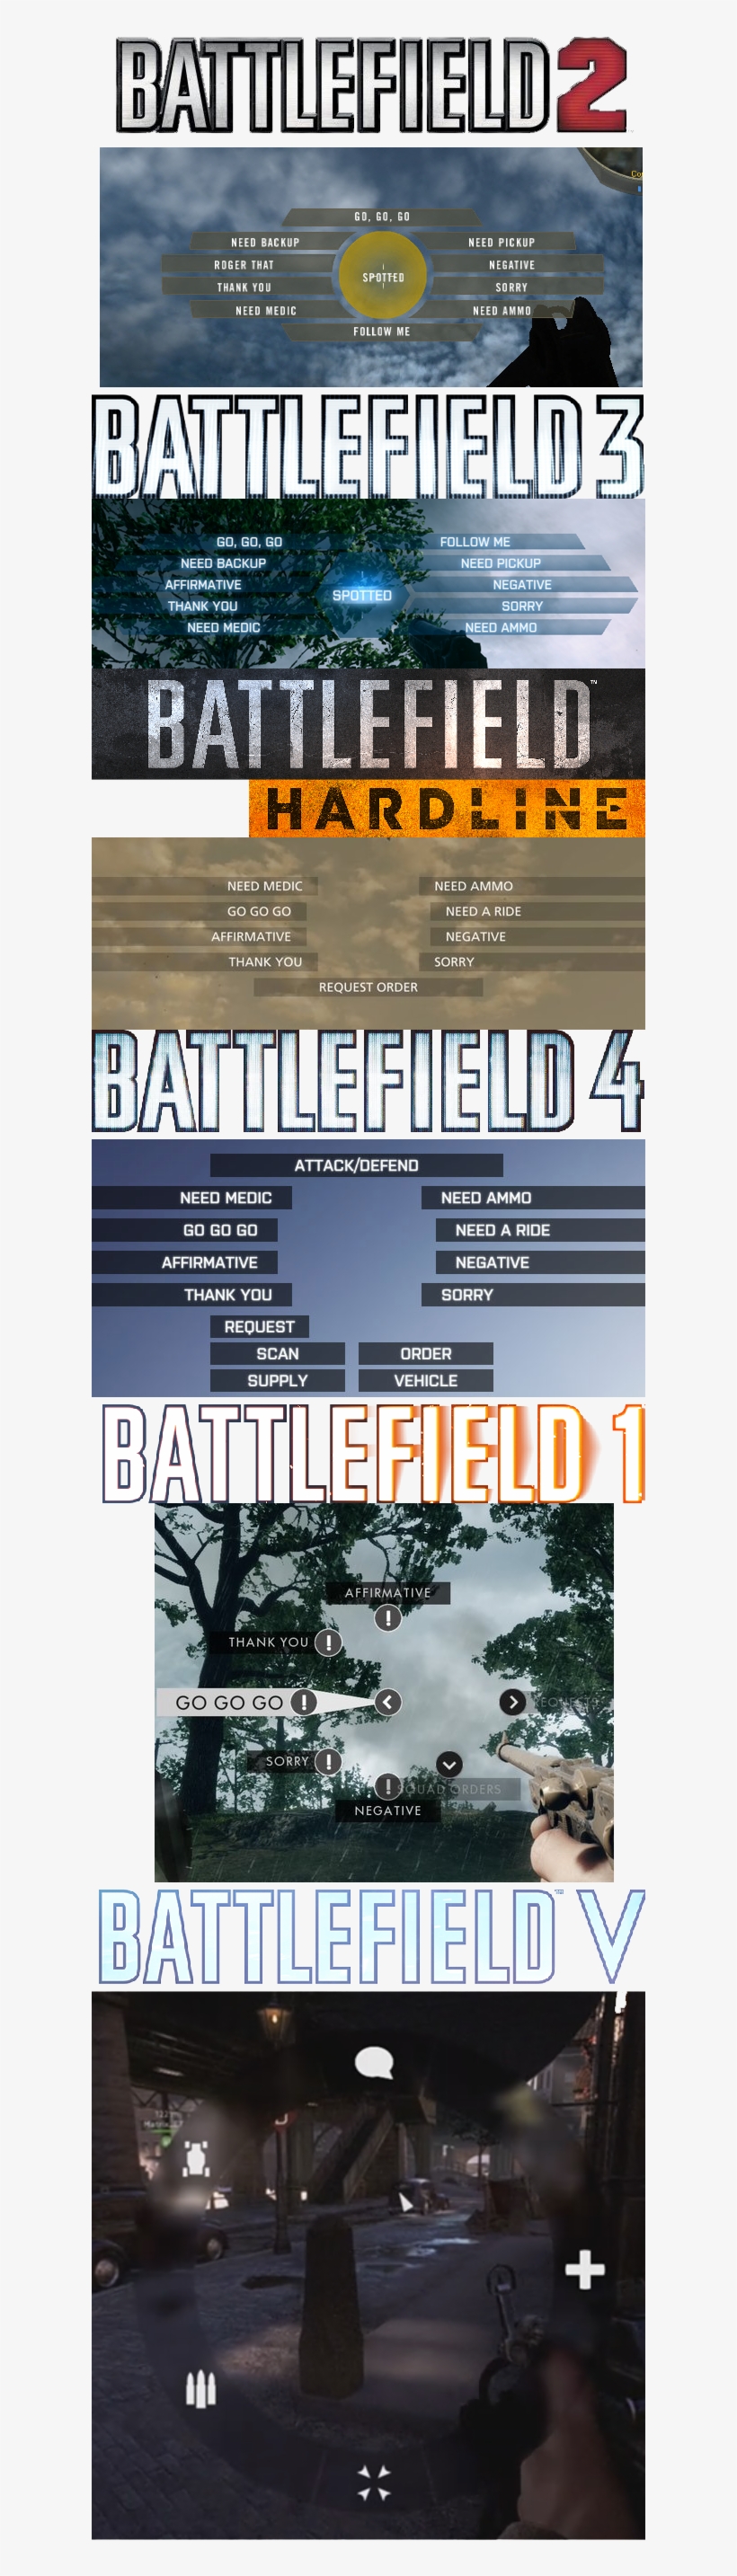 Bf Legacybattlefield's Commo Rose Has Gotten Uglier - Electronic Arts Battlefield Hardline Deluxe Edition, transparent png #2786040